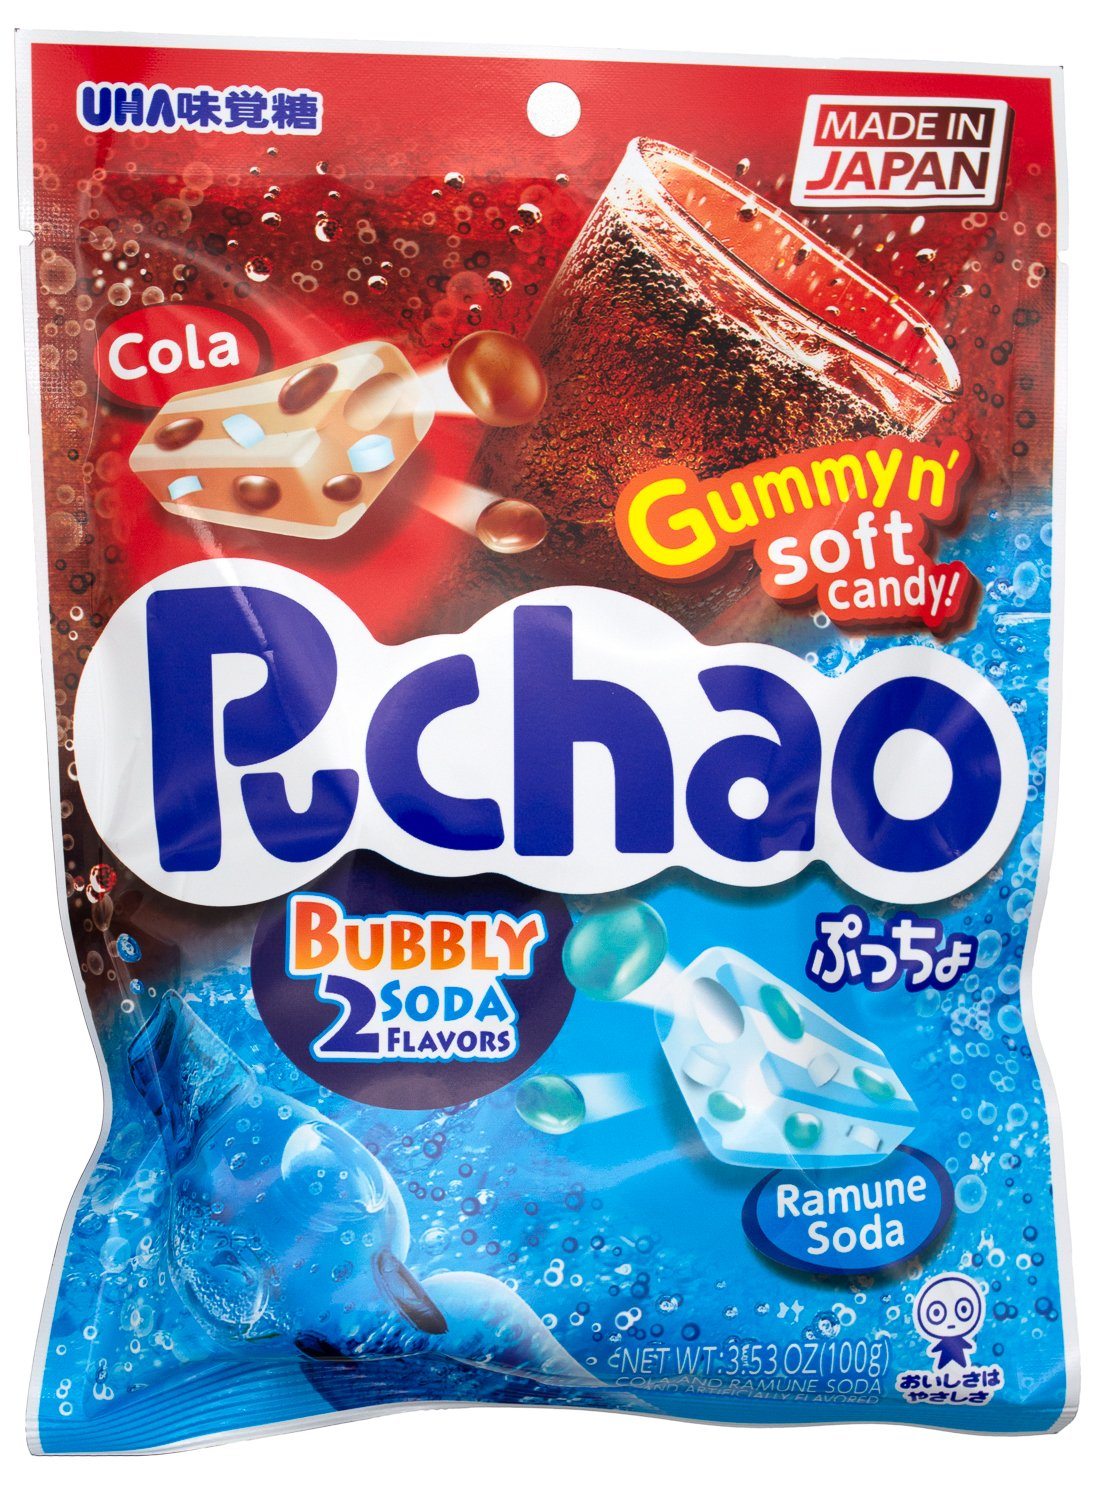 Puchao Gummy n' Soft Candy Puchao Bubbly 2 Soda Flavors 3.53 Ounce 